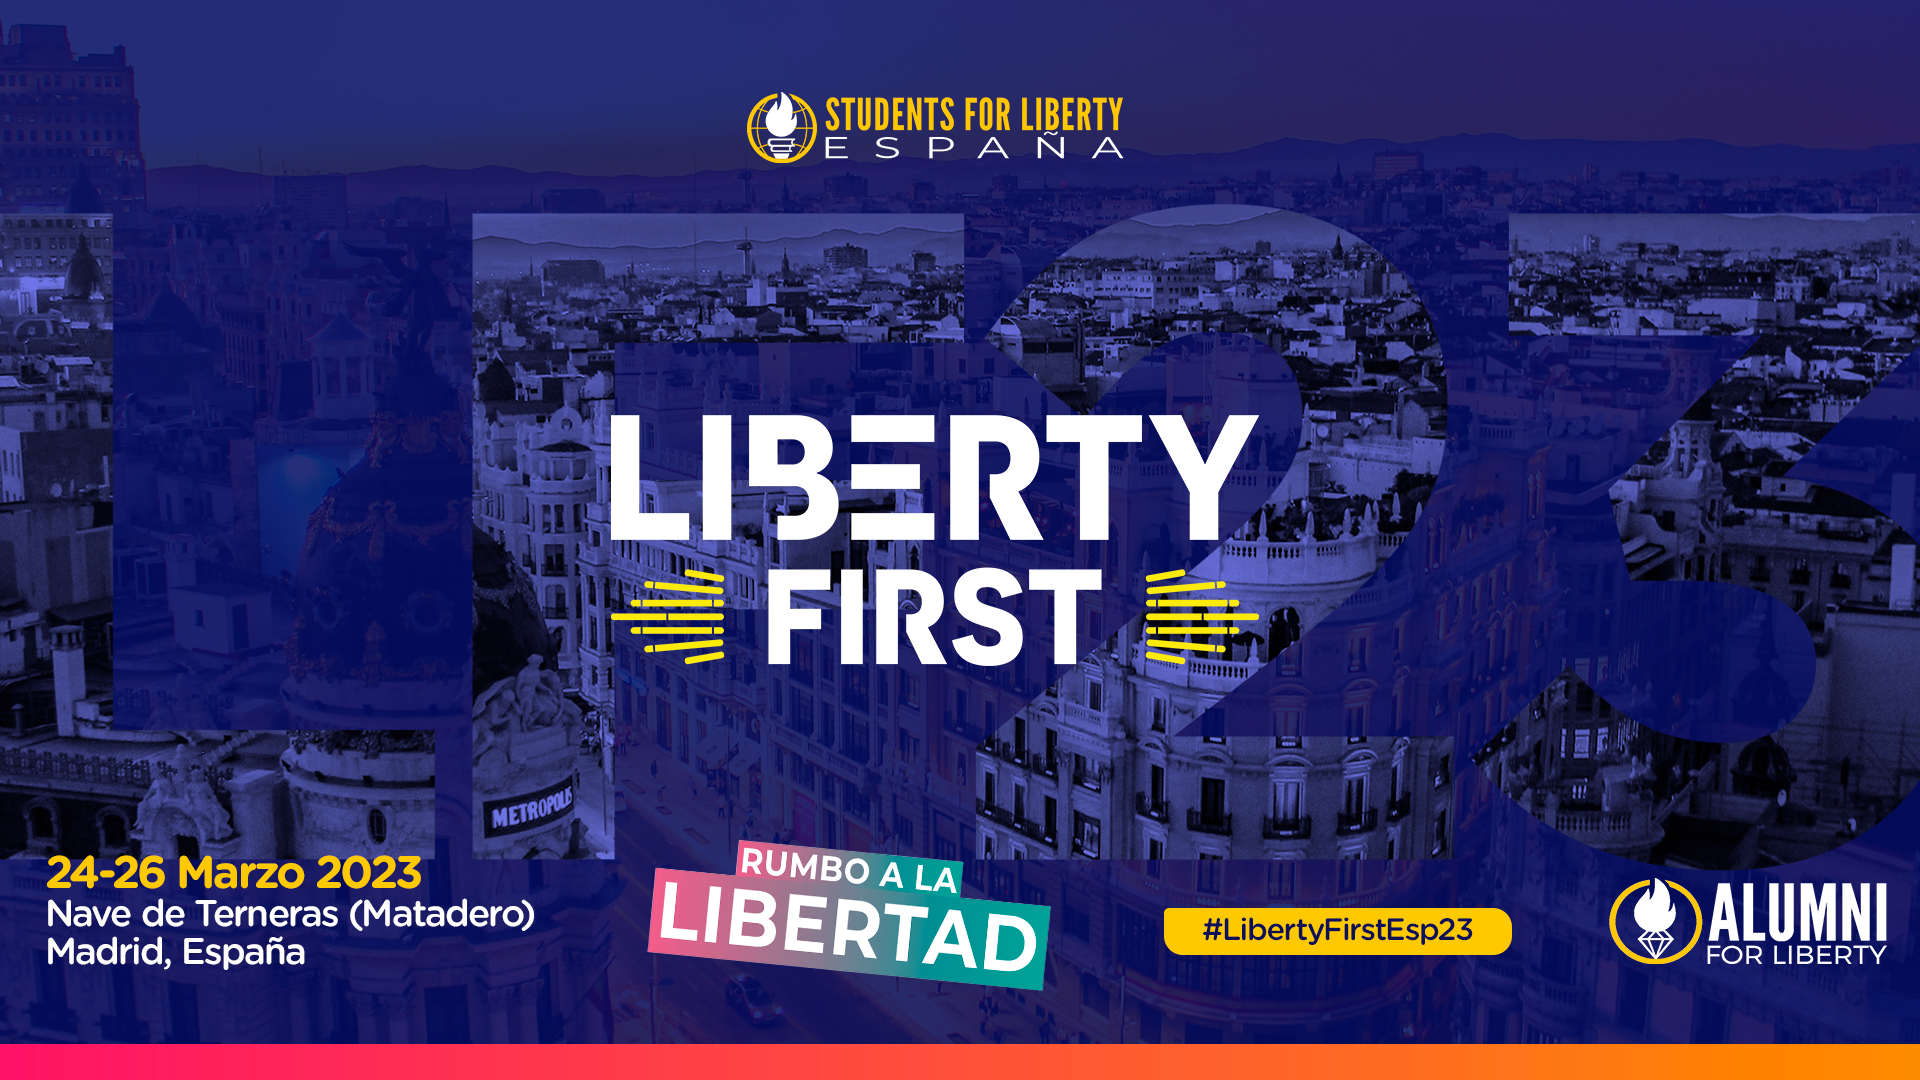 This weekend, Saturday, March 25, and Sunday, March 26, Students For Liberty will host this year's Liberty First conference in Madrid, Spain.